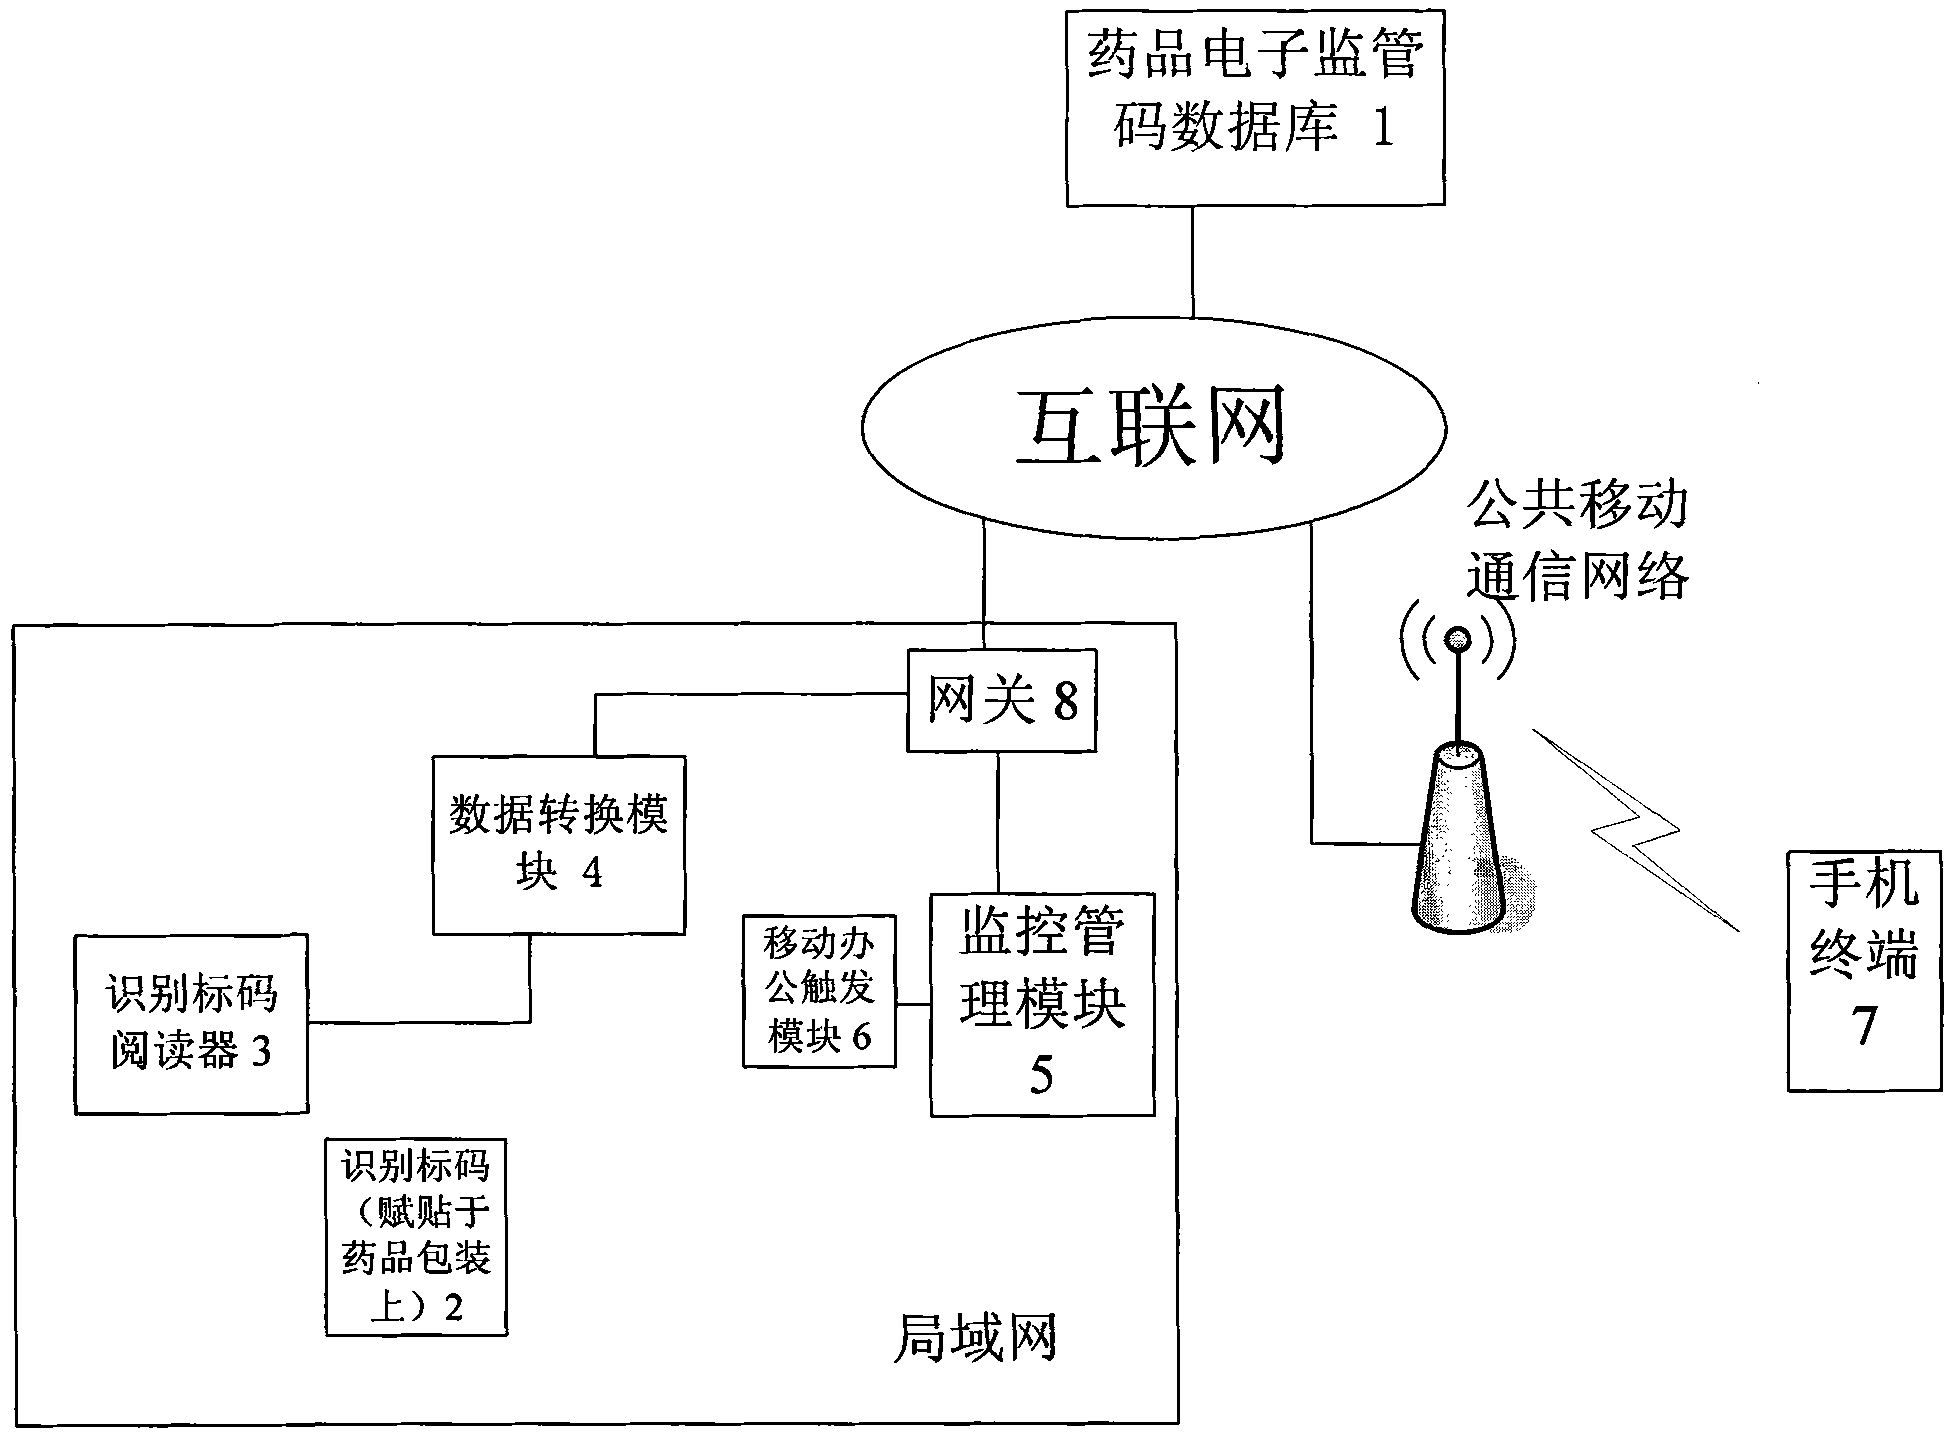 Medical logistic information processing system and method